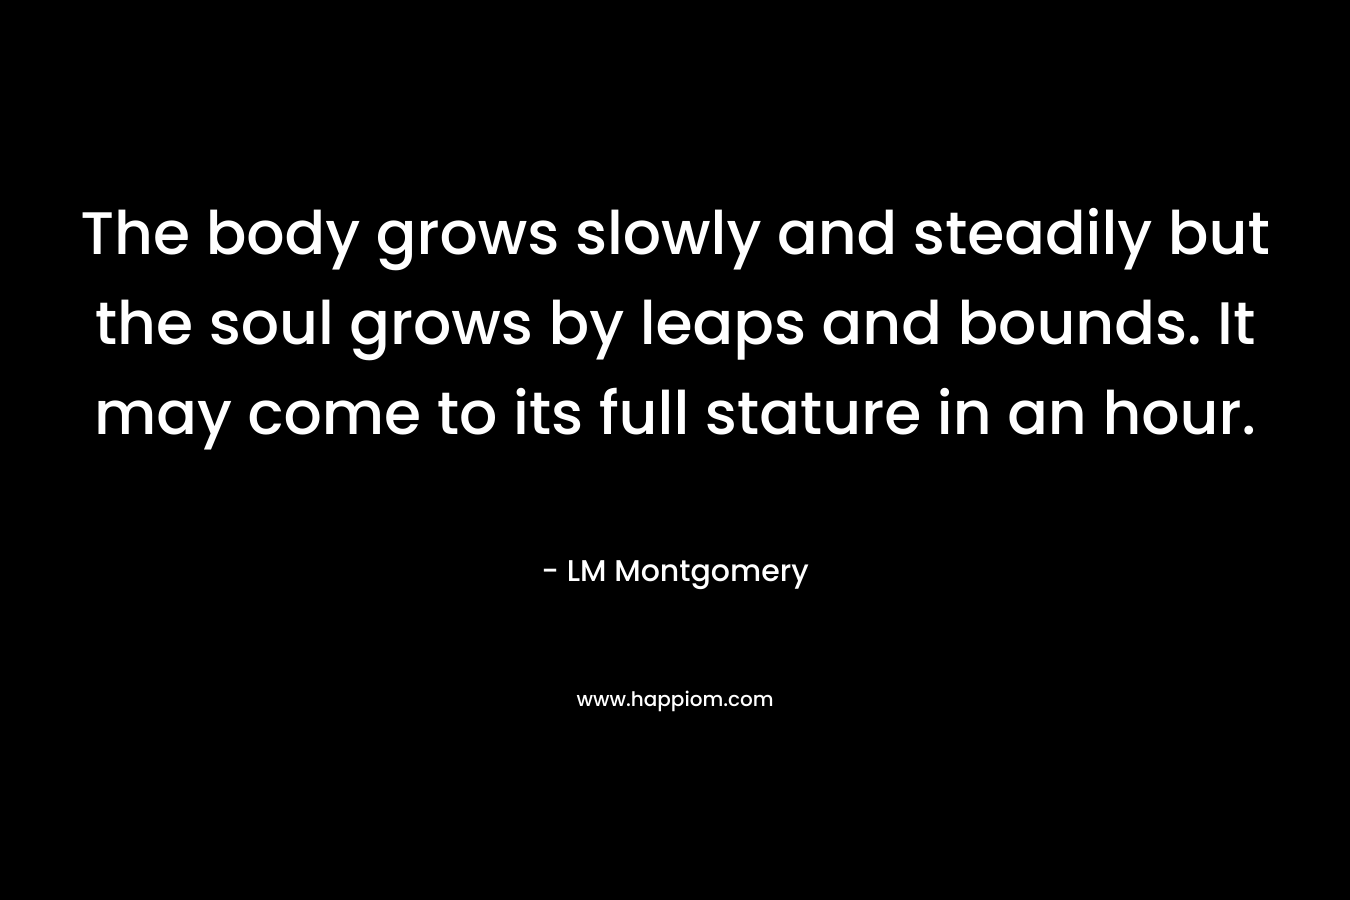 The body grows slowly and steadily but the soul grows by leaps and bounds. It may come to its full stature in an hour.